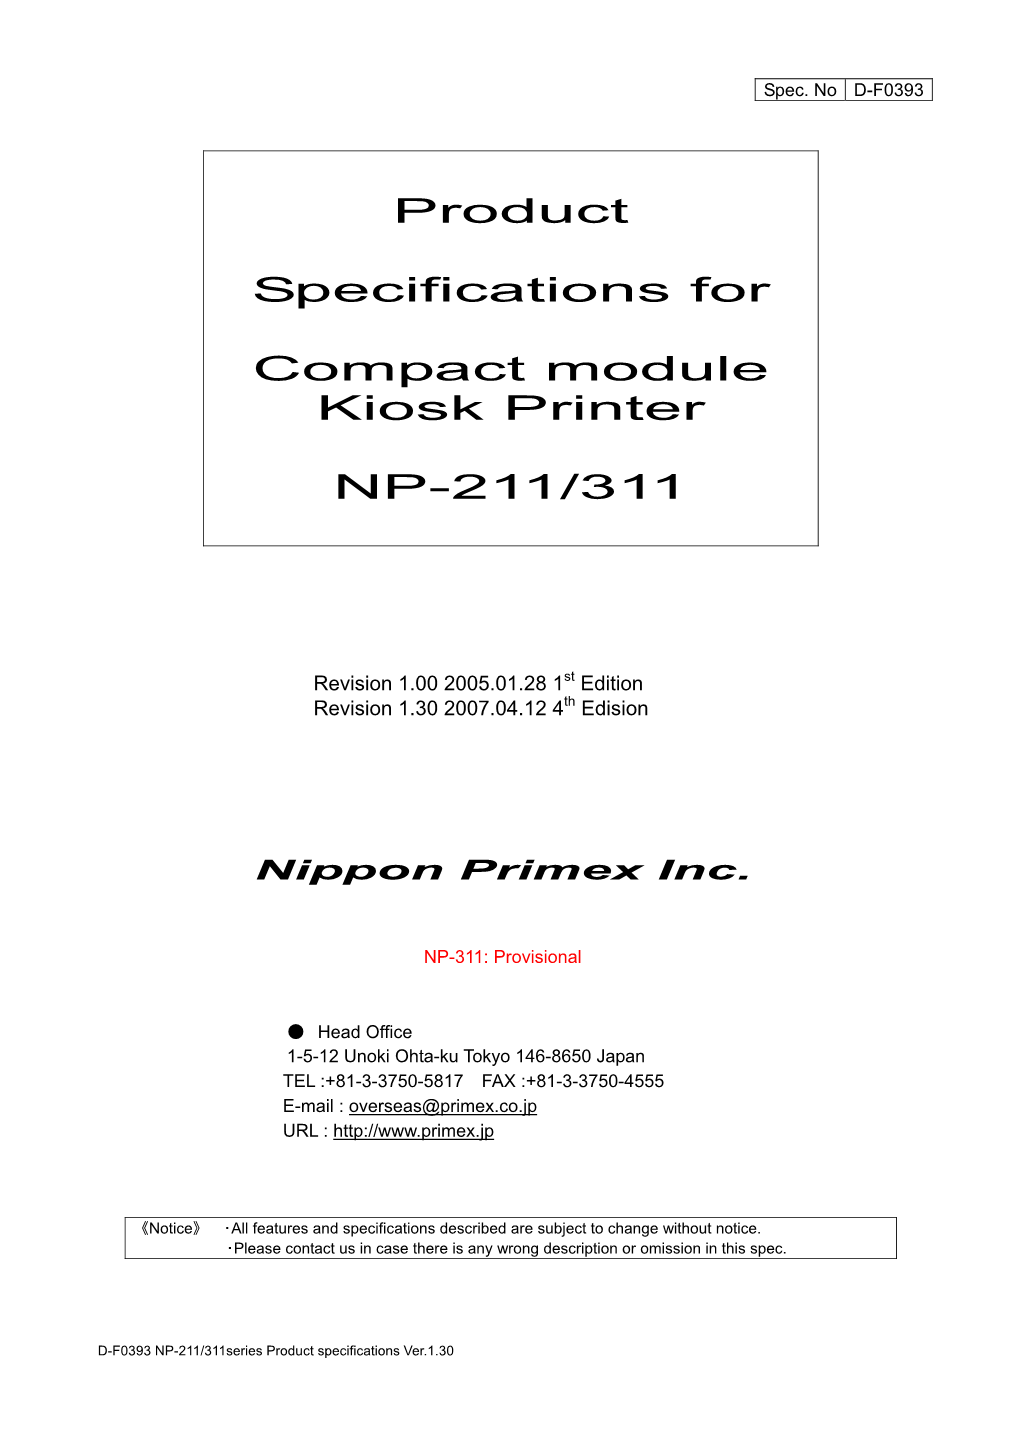 Product Specifications for Compact Module Kiosk Printer NP-211/311